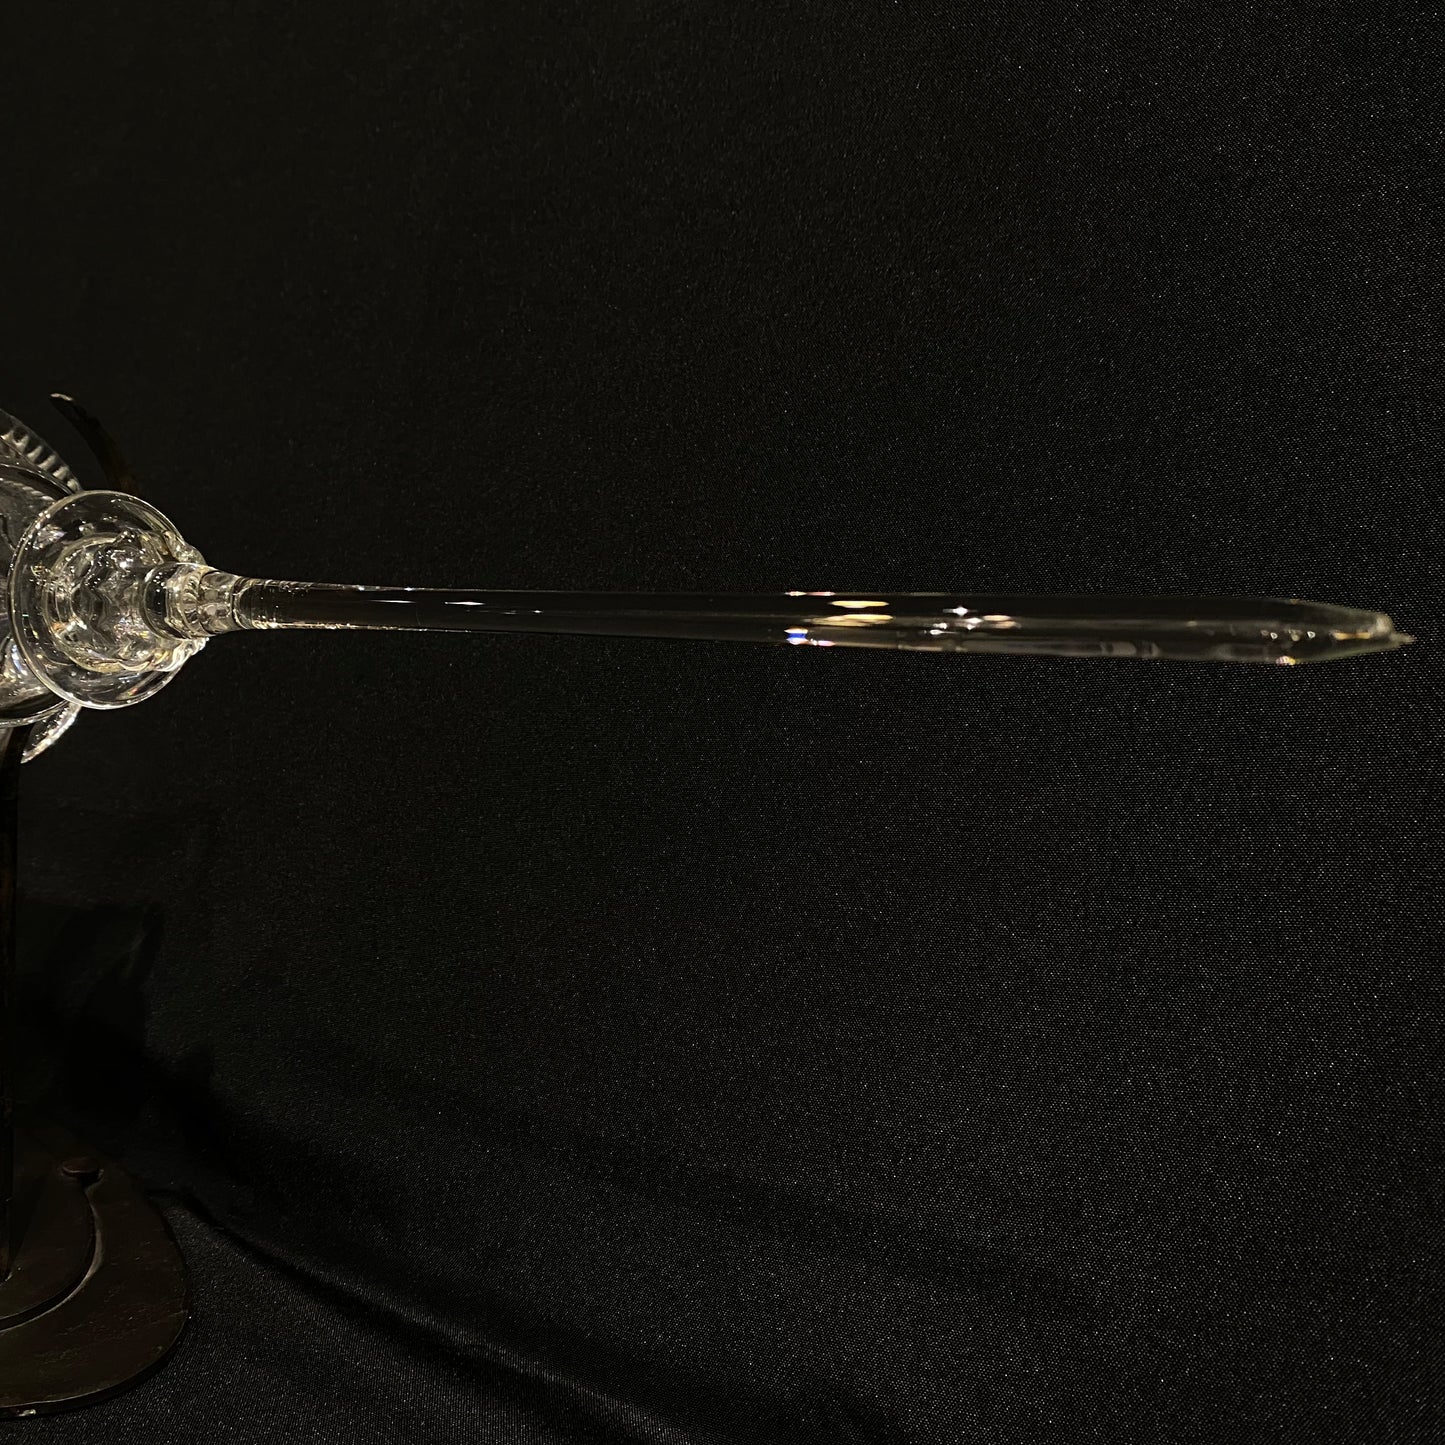 Glass Syringe on Metal Stand by Andy Paiko